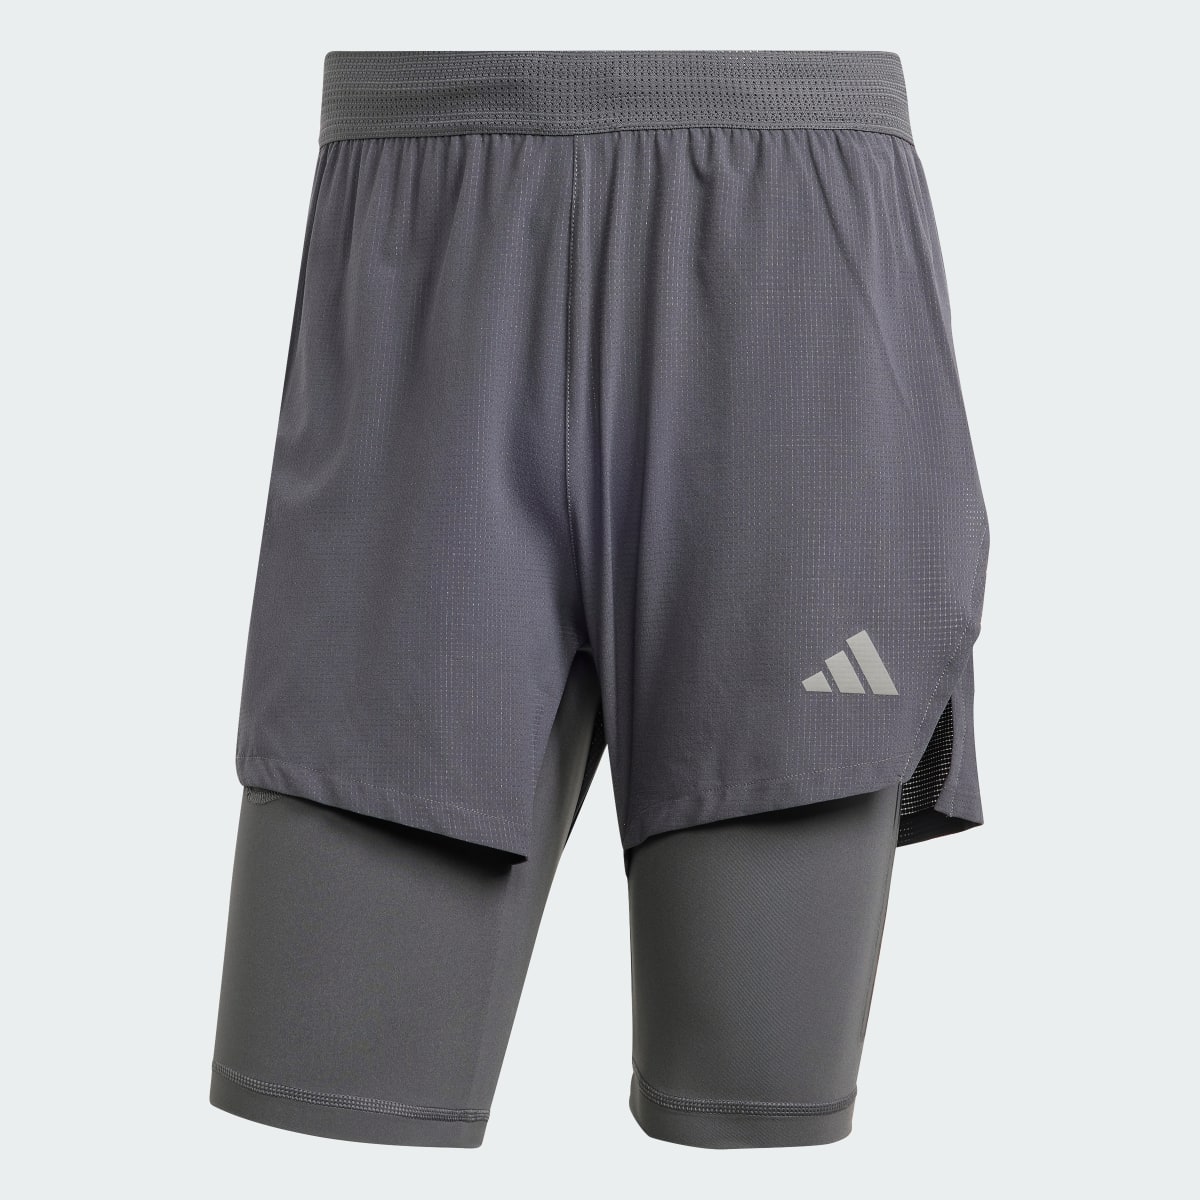 Adidas HEAT.RDY HIIT Elevated Training 2-in-1 Shorts. 5